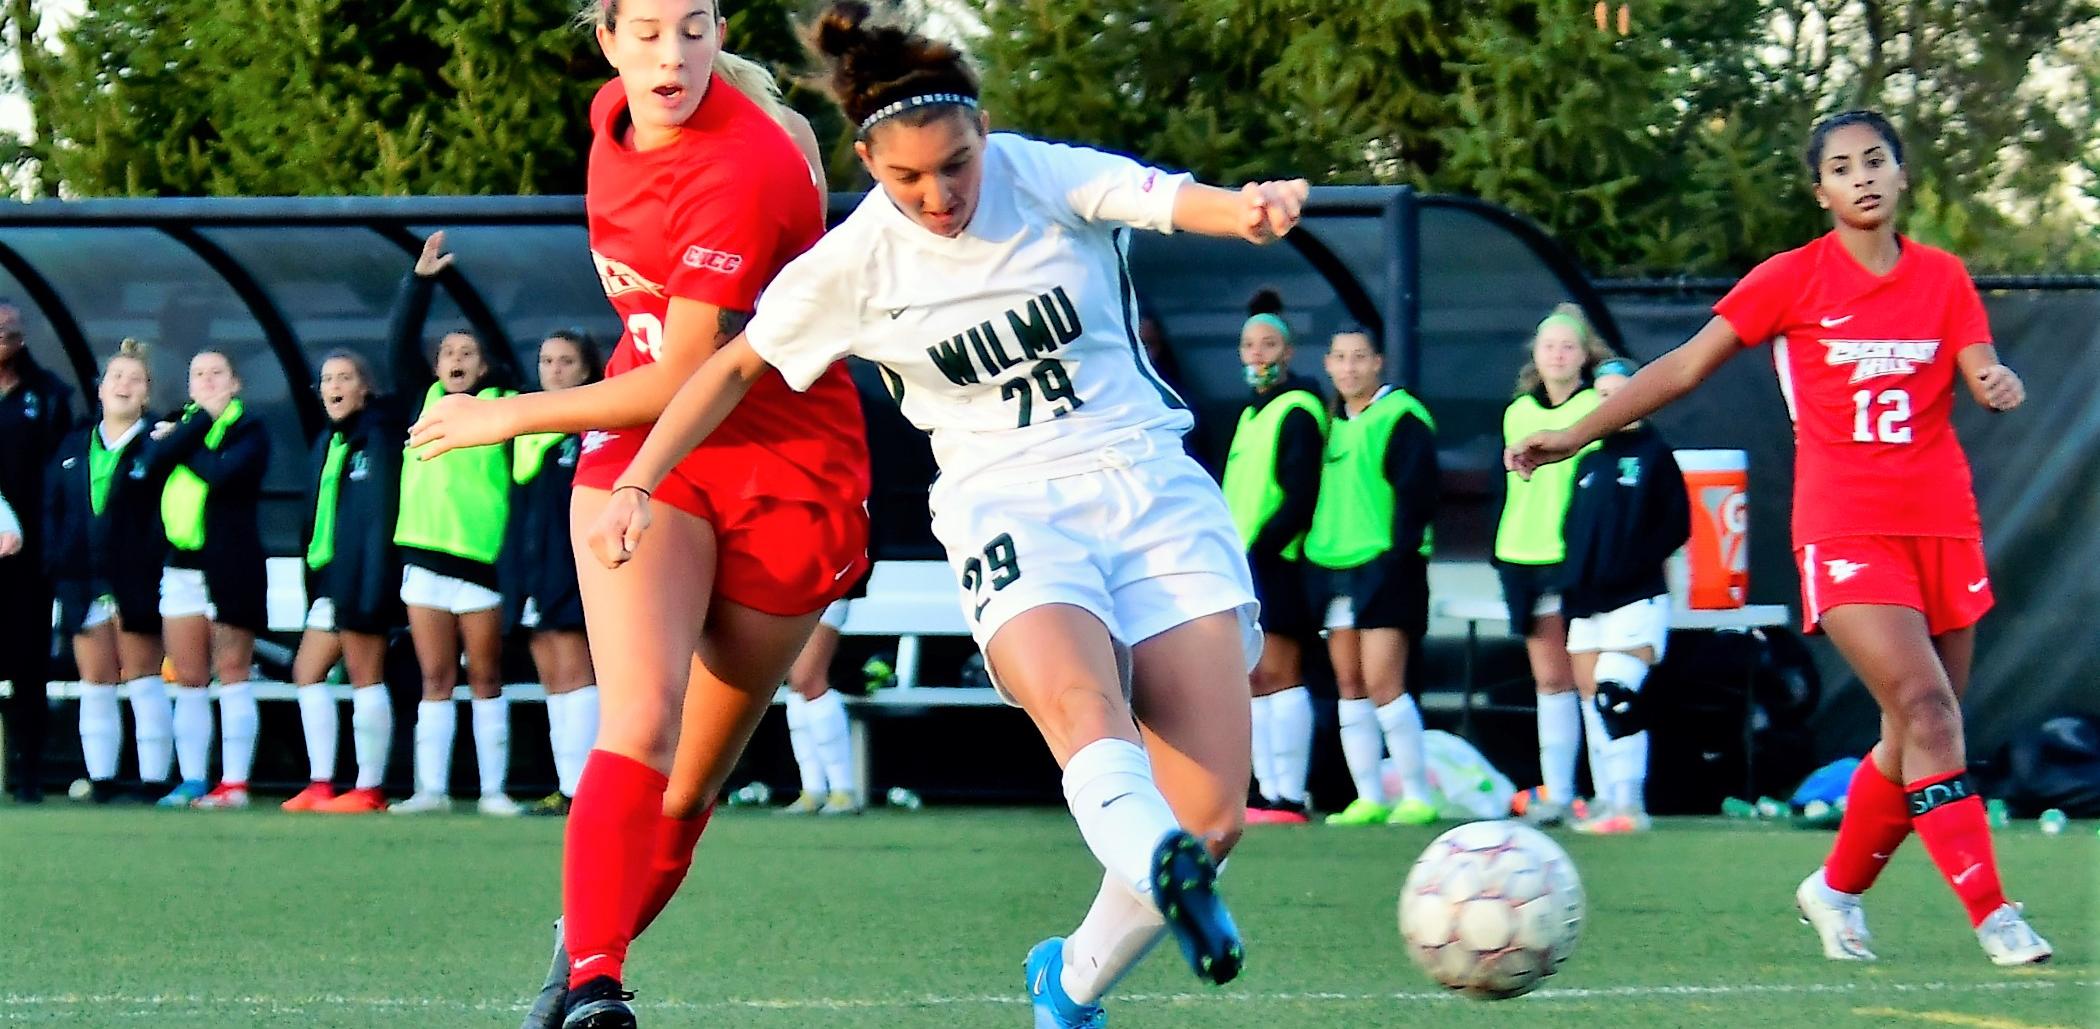 File photo of Jimena Garcia Risoto who recorded a hat trick in the CACC Tournament Semifinals. Copyright 2021; Wilmington University. All rights reserved. Photo by James Jones. November 3, 2021 vs. Chestnut Hill.